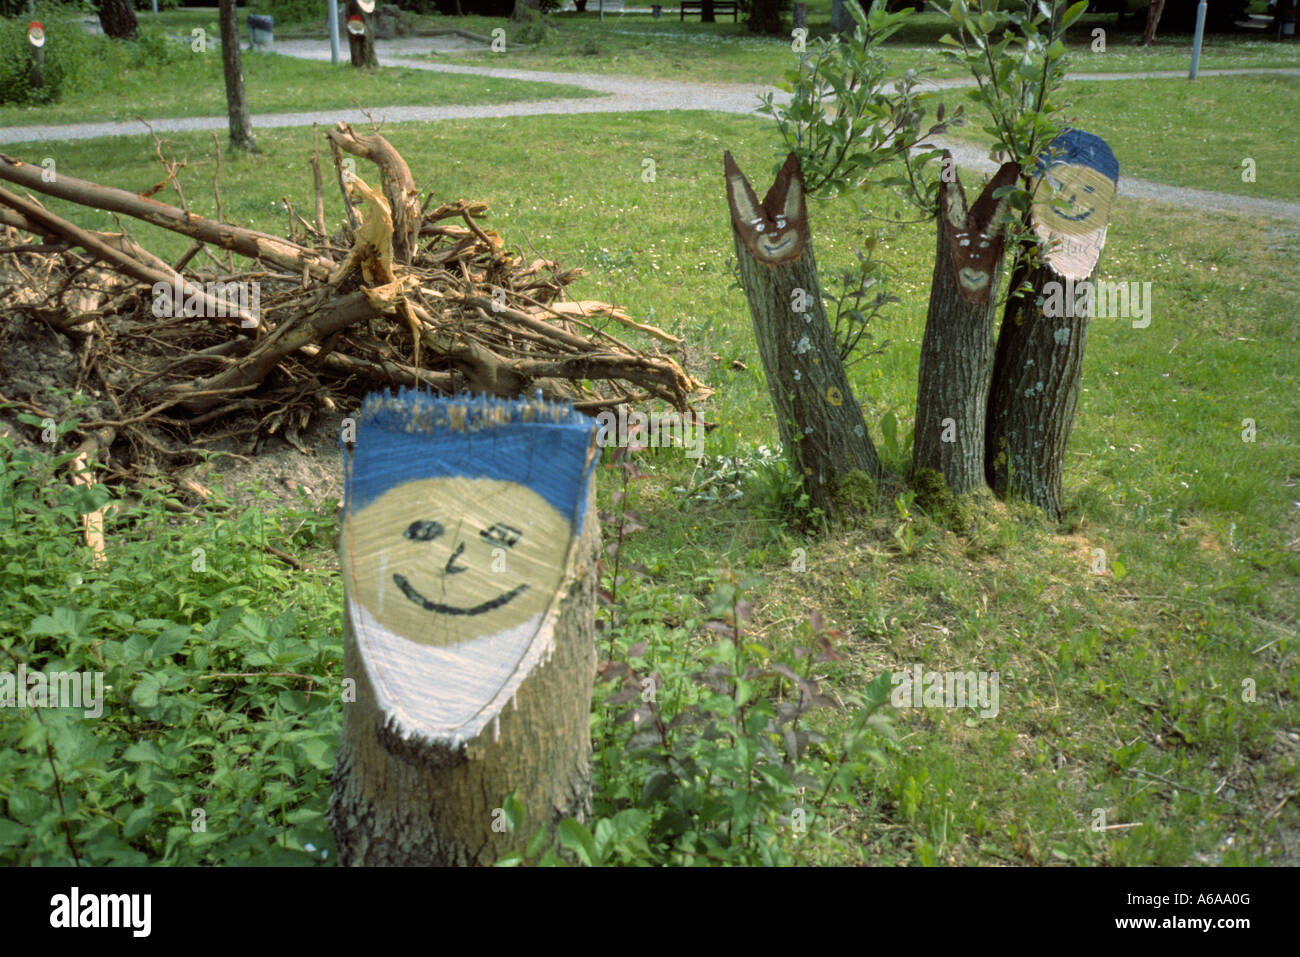 Tree stumps painted with the faces of garden gnomes and rabbits in Germany Stock Photo